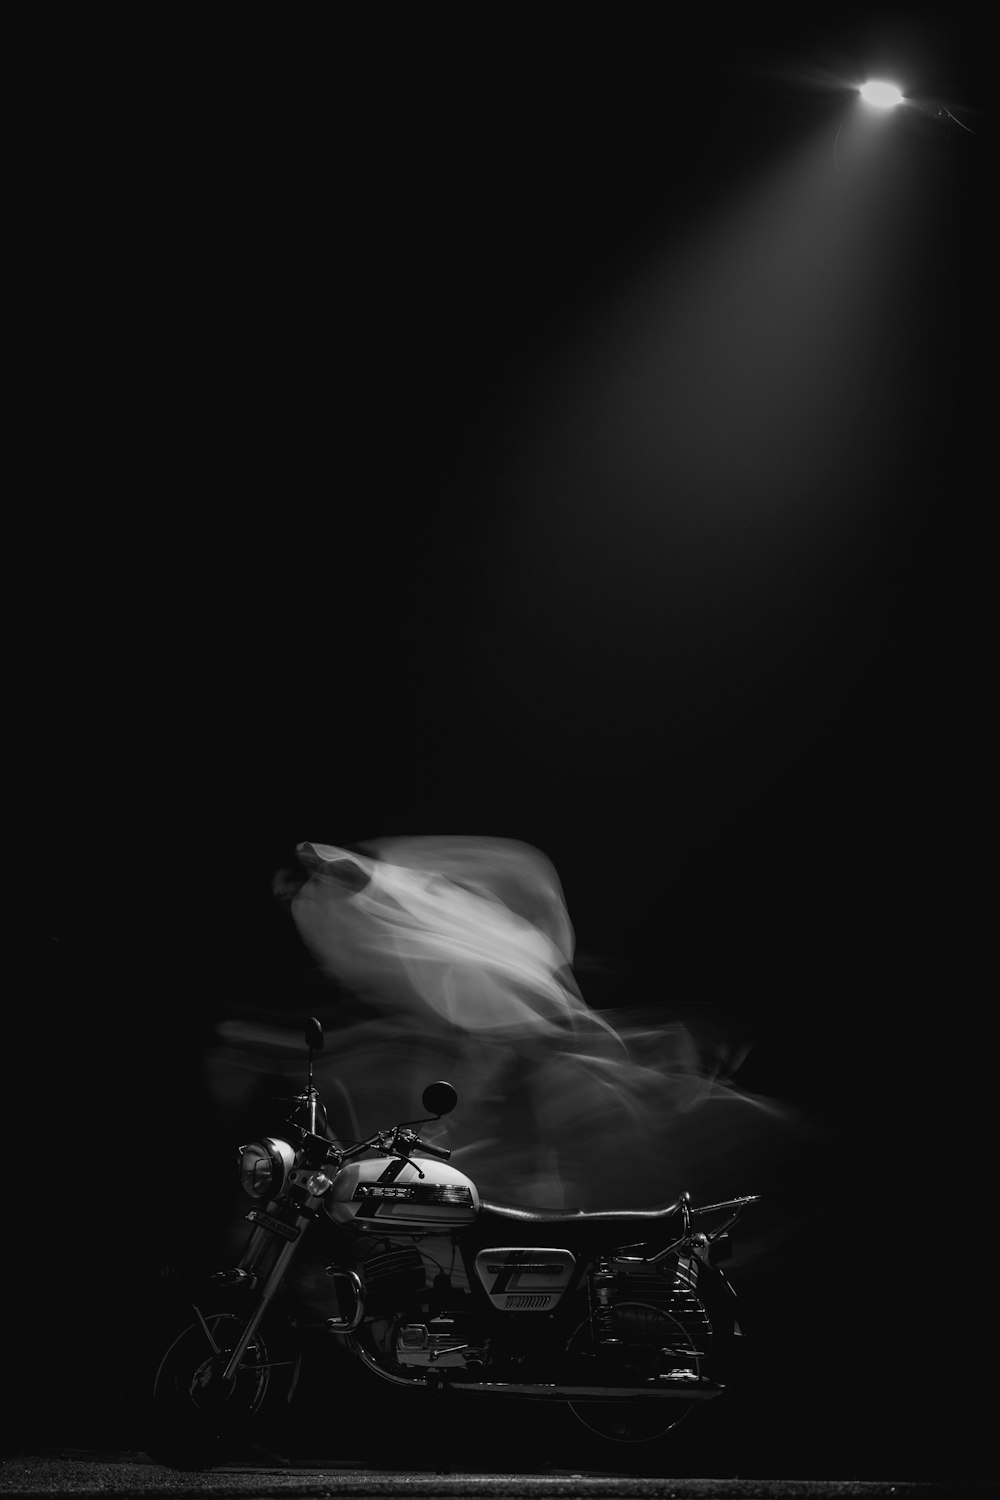 a black and white photo of a motorcycle under a light